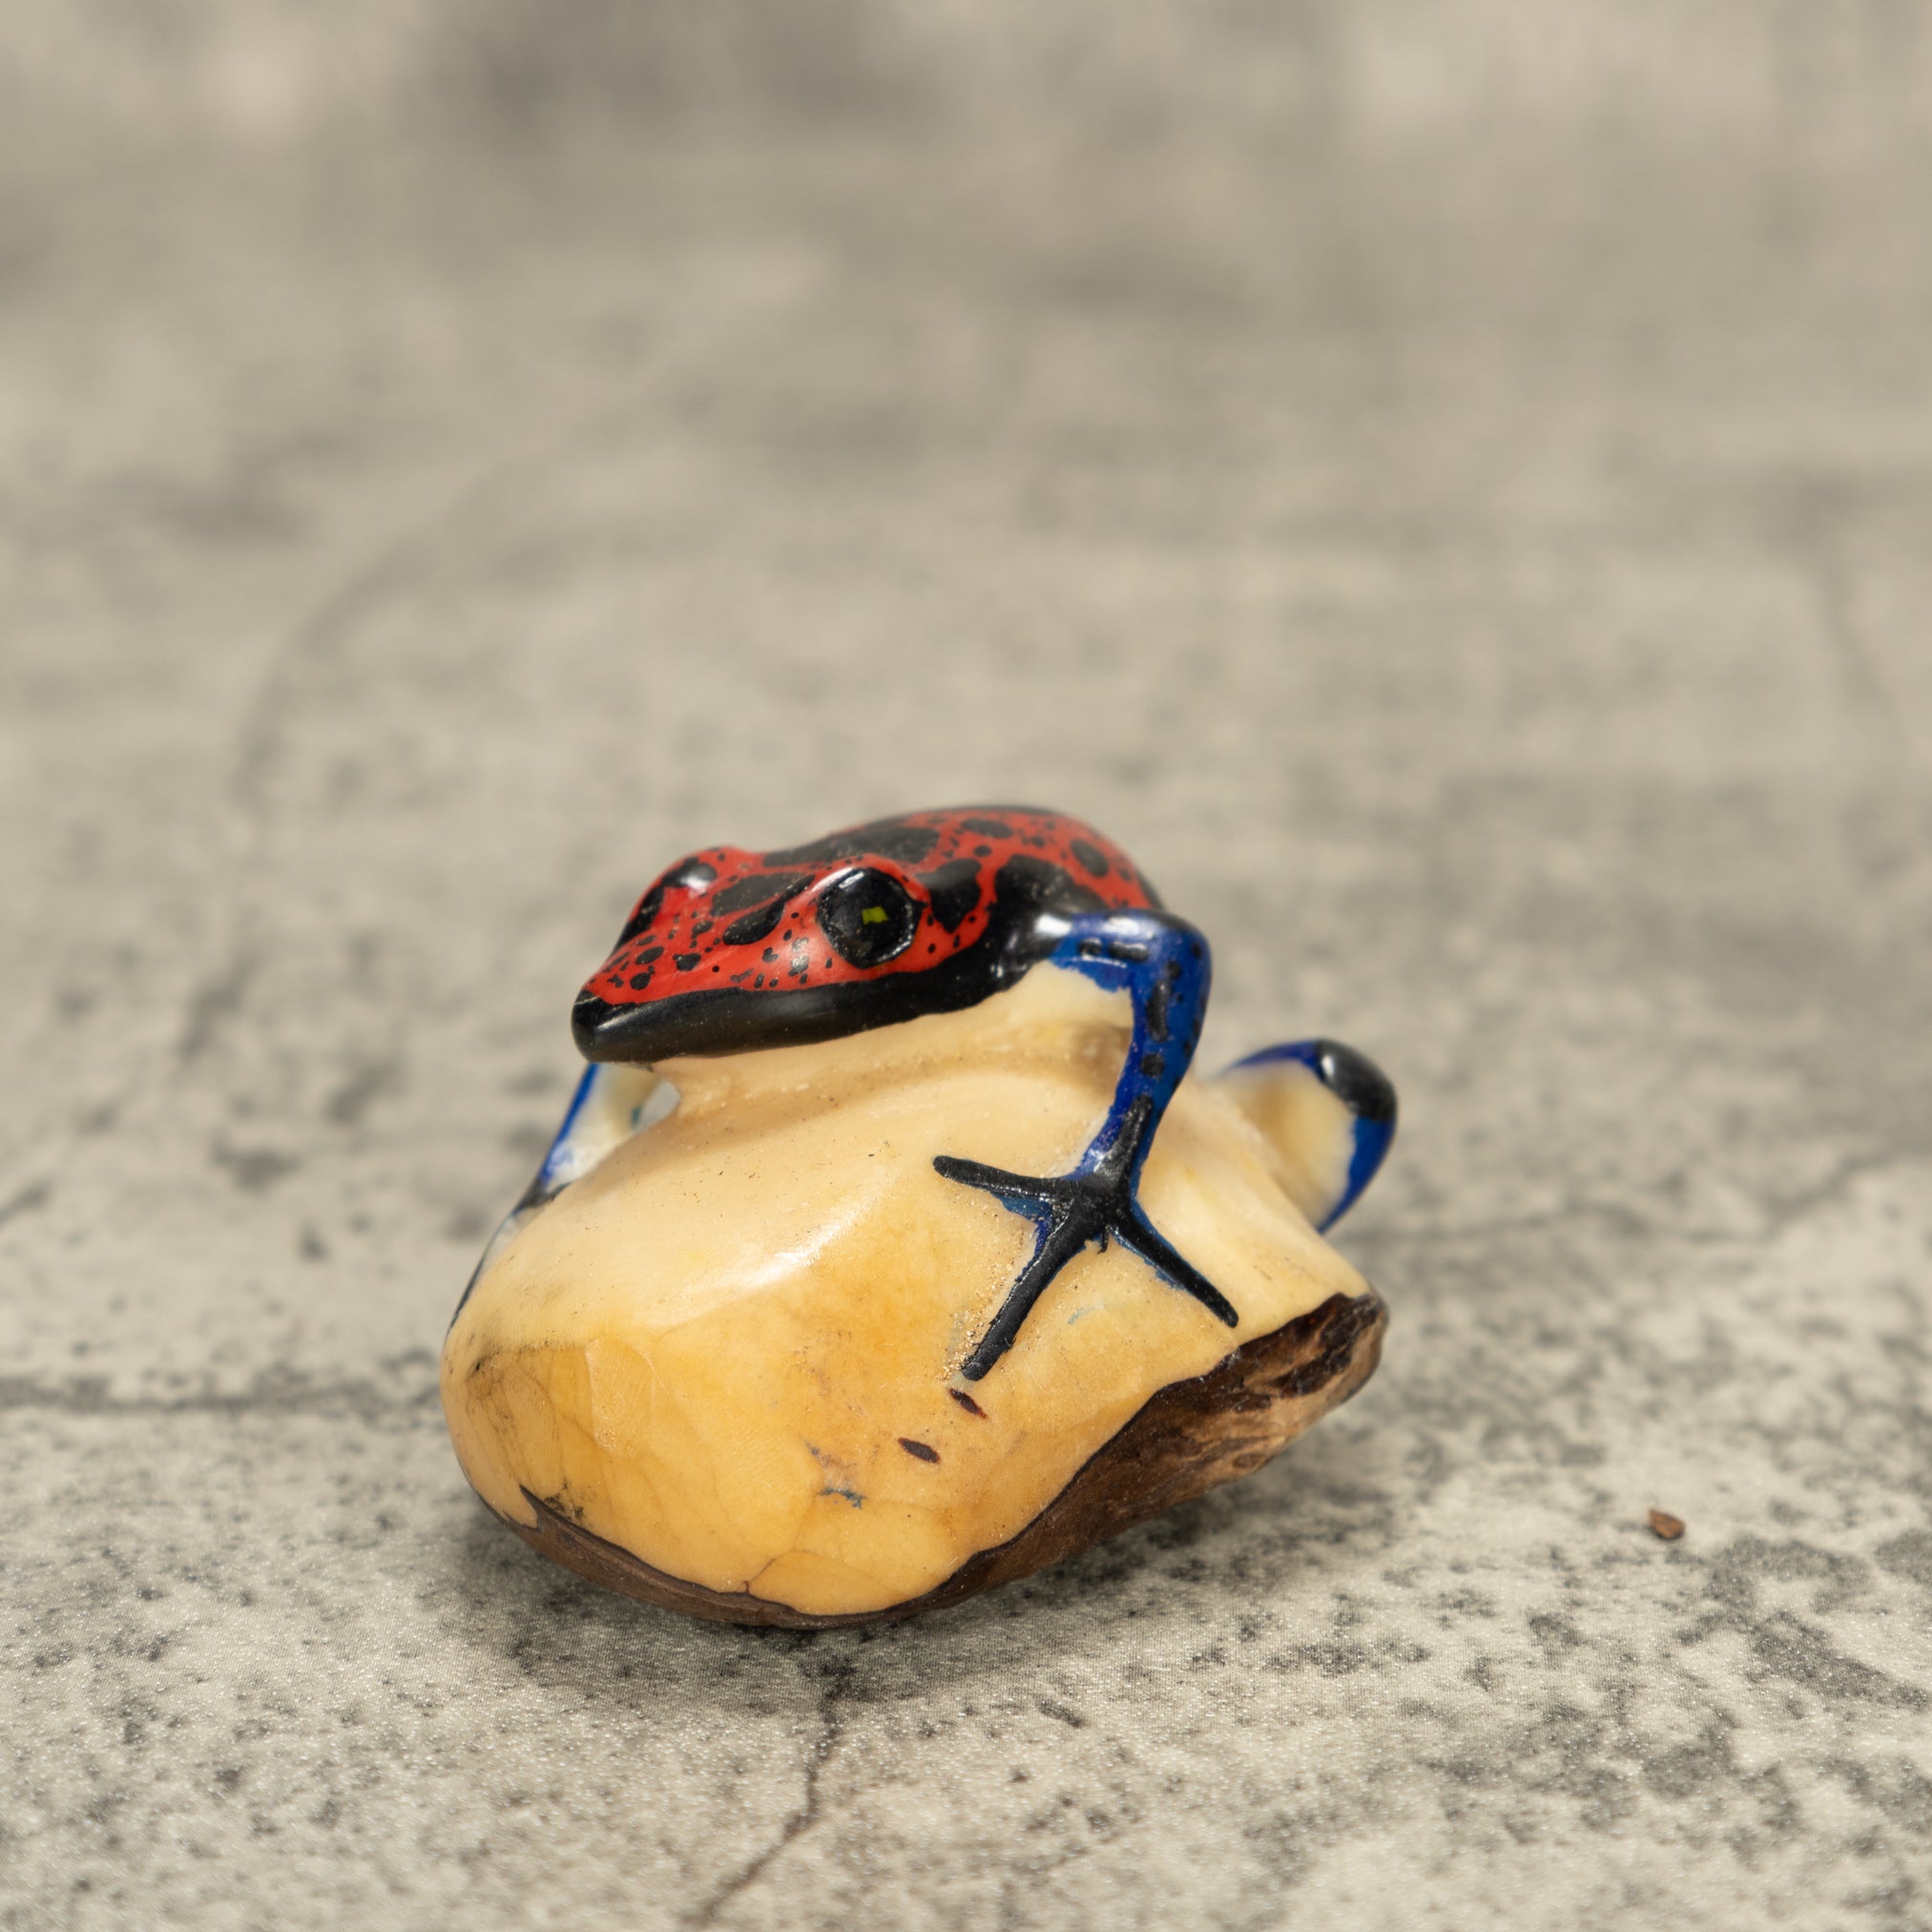 Red And Black Poison Dart Frog Tagua Nut Carving